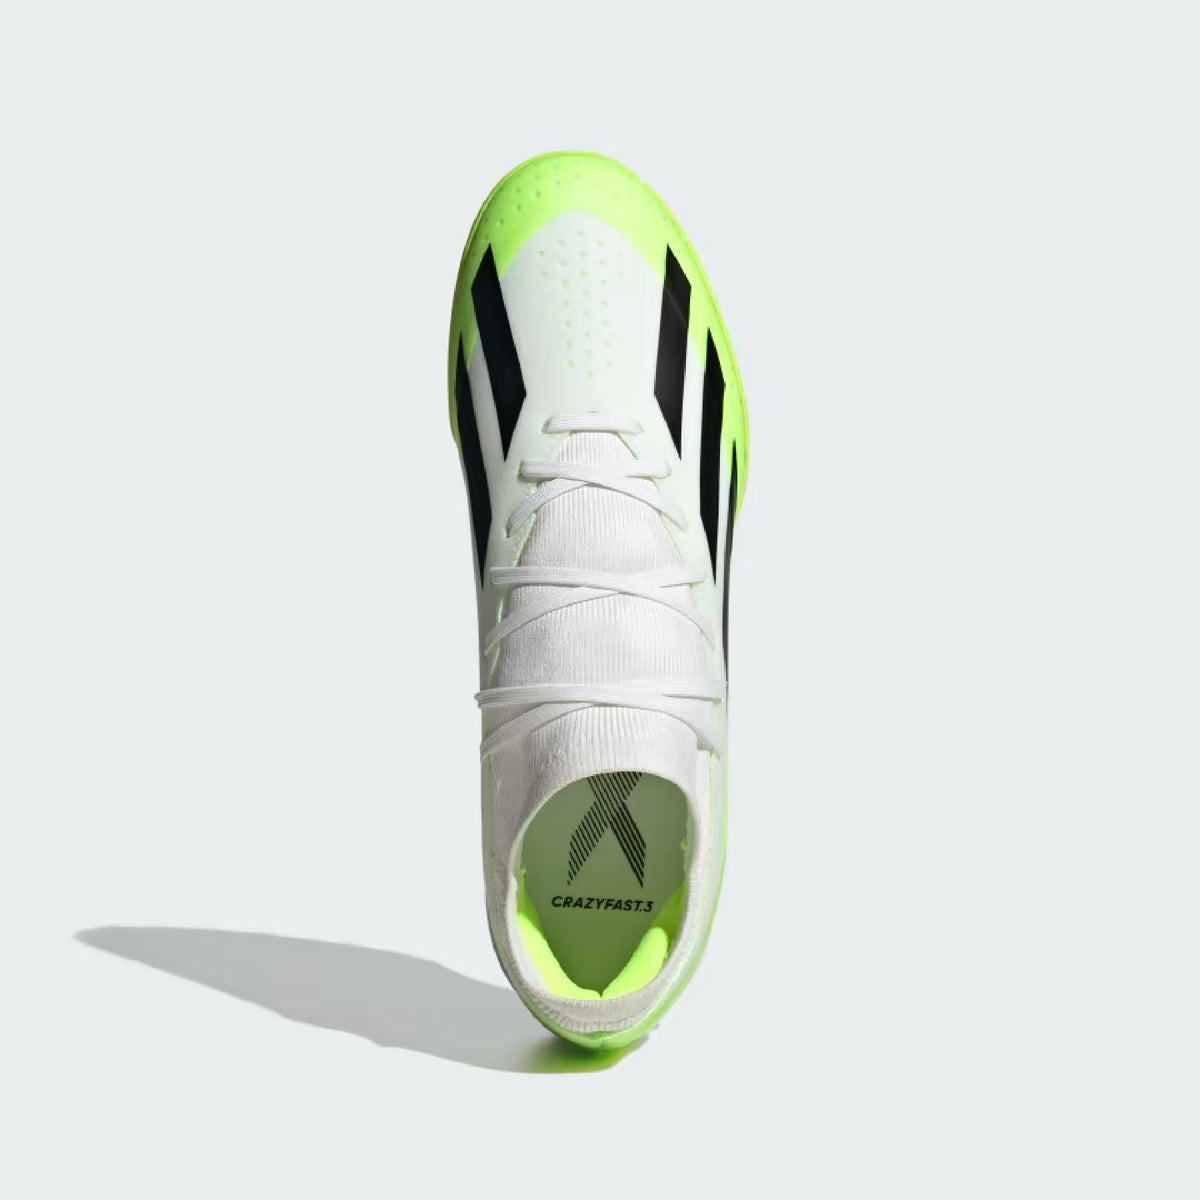 adidas X CrazyFast.3 TF Turf Soccer Cleat - White/Core Black/Lucid 